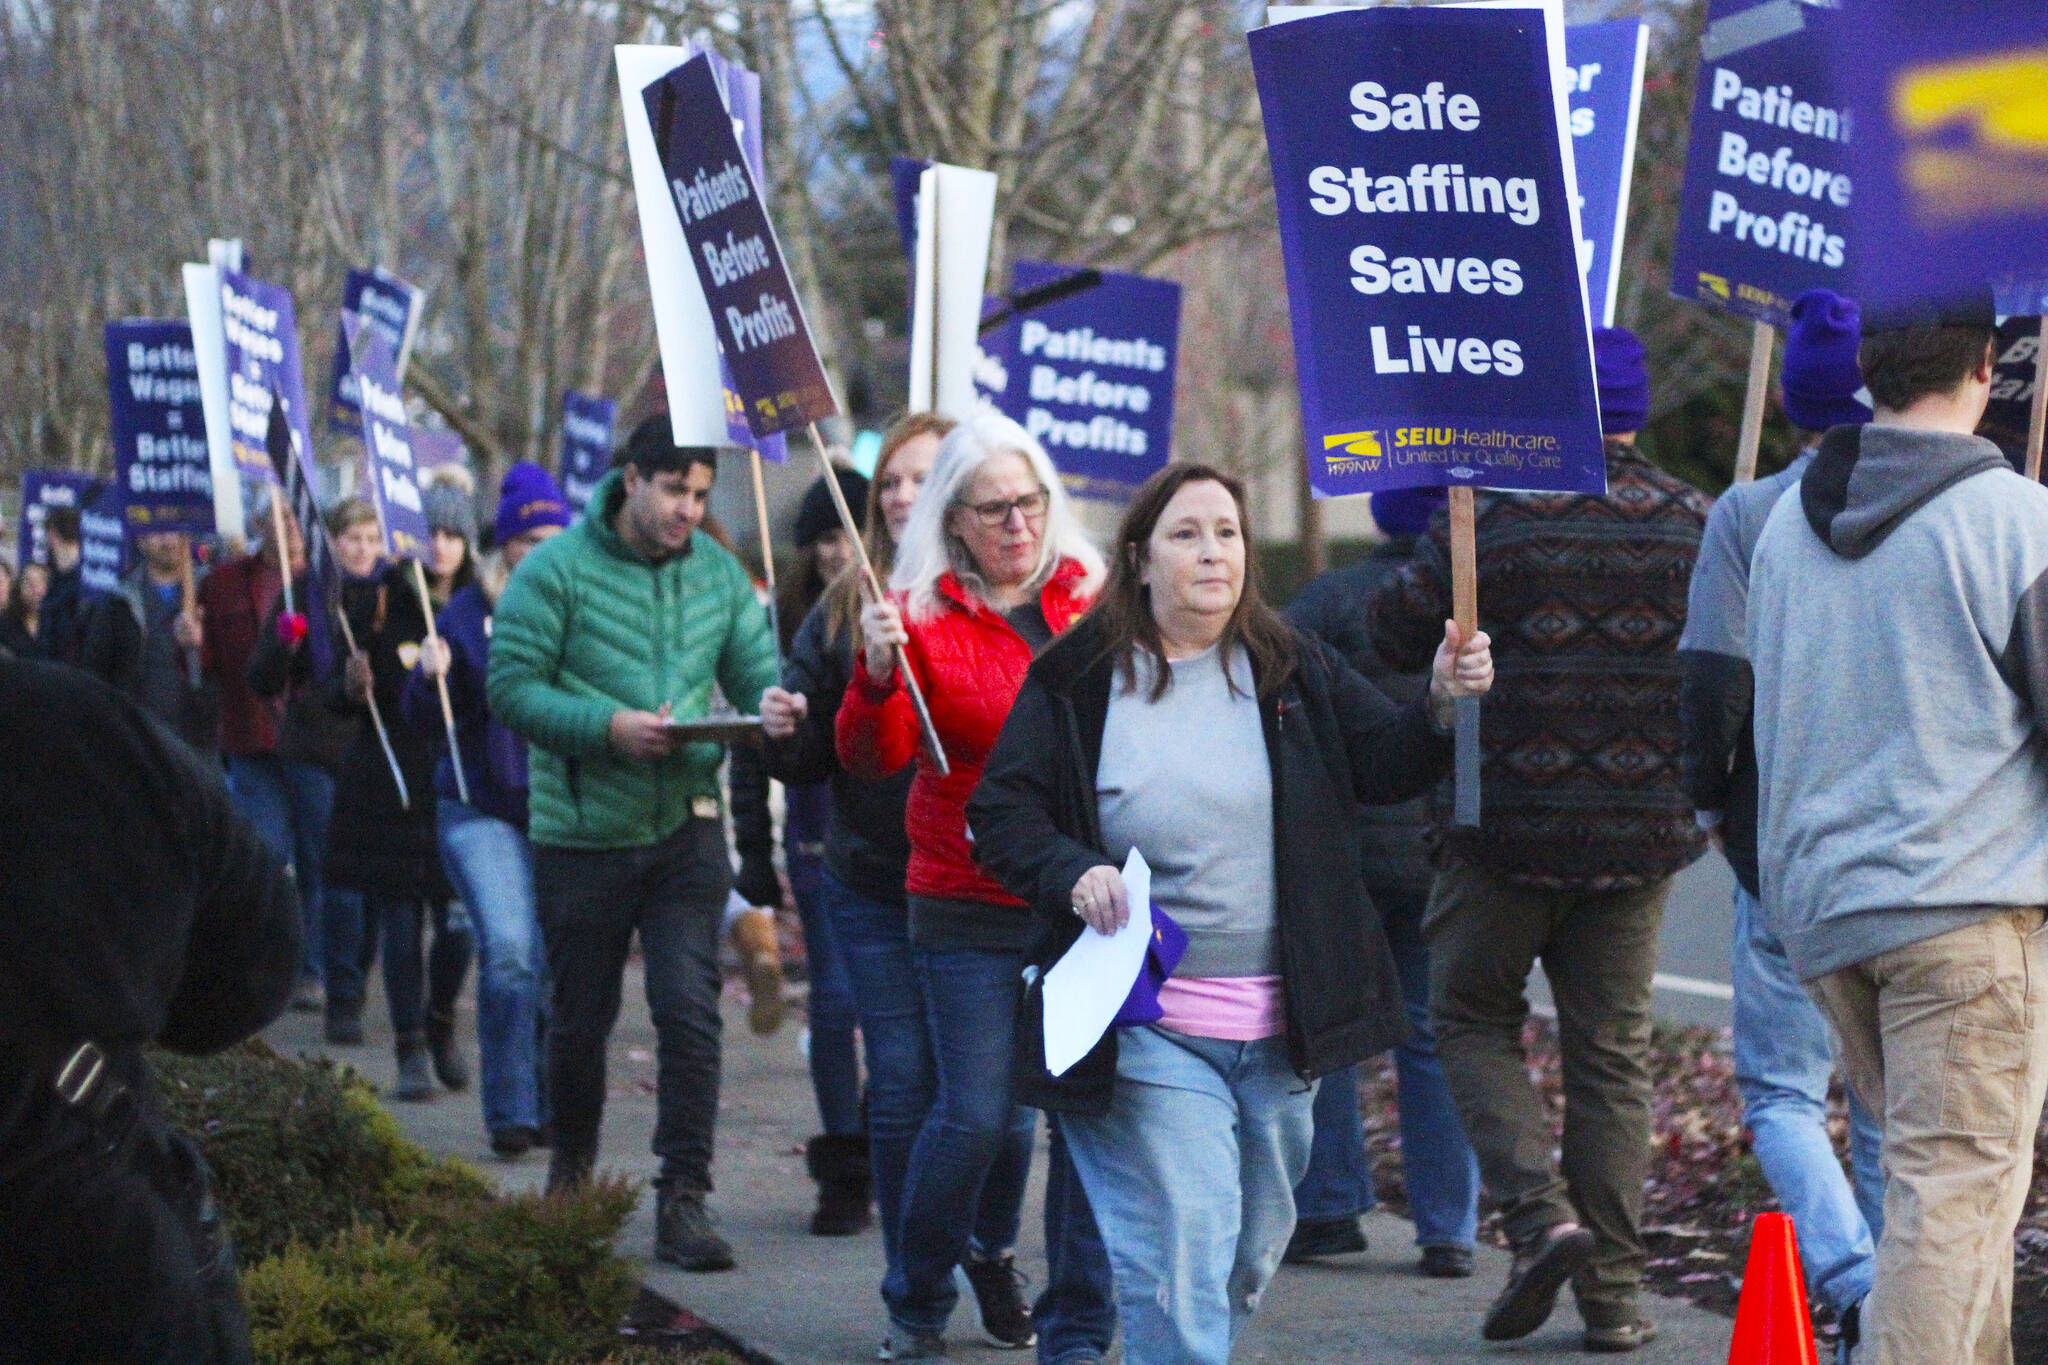 A few dozen St. Elizabeth hospital nurses, off duty, and their families and friends held an information picket last Thursday to protest high nurse-patient ratios, unsafe working conditions, and low pay. Photo by Ray Miller-Still